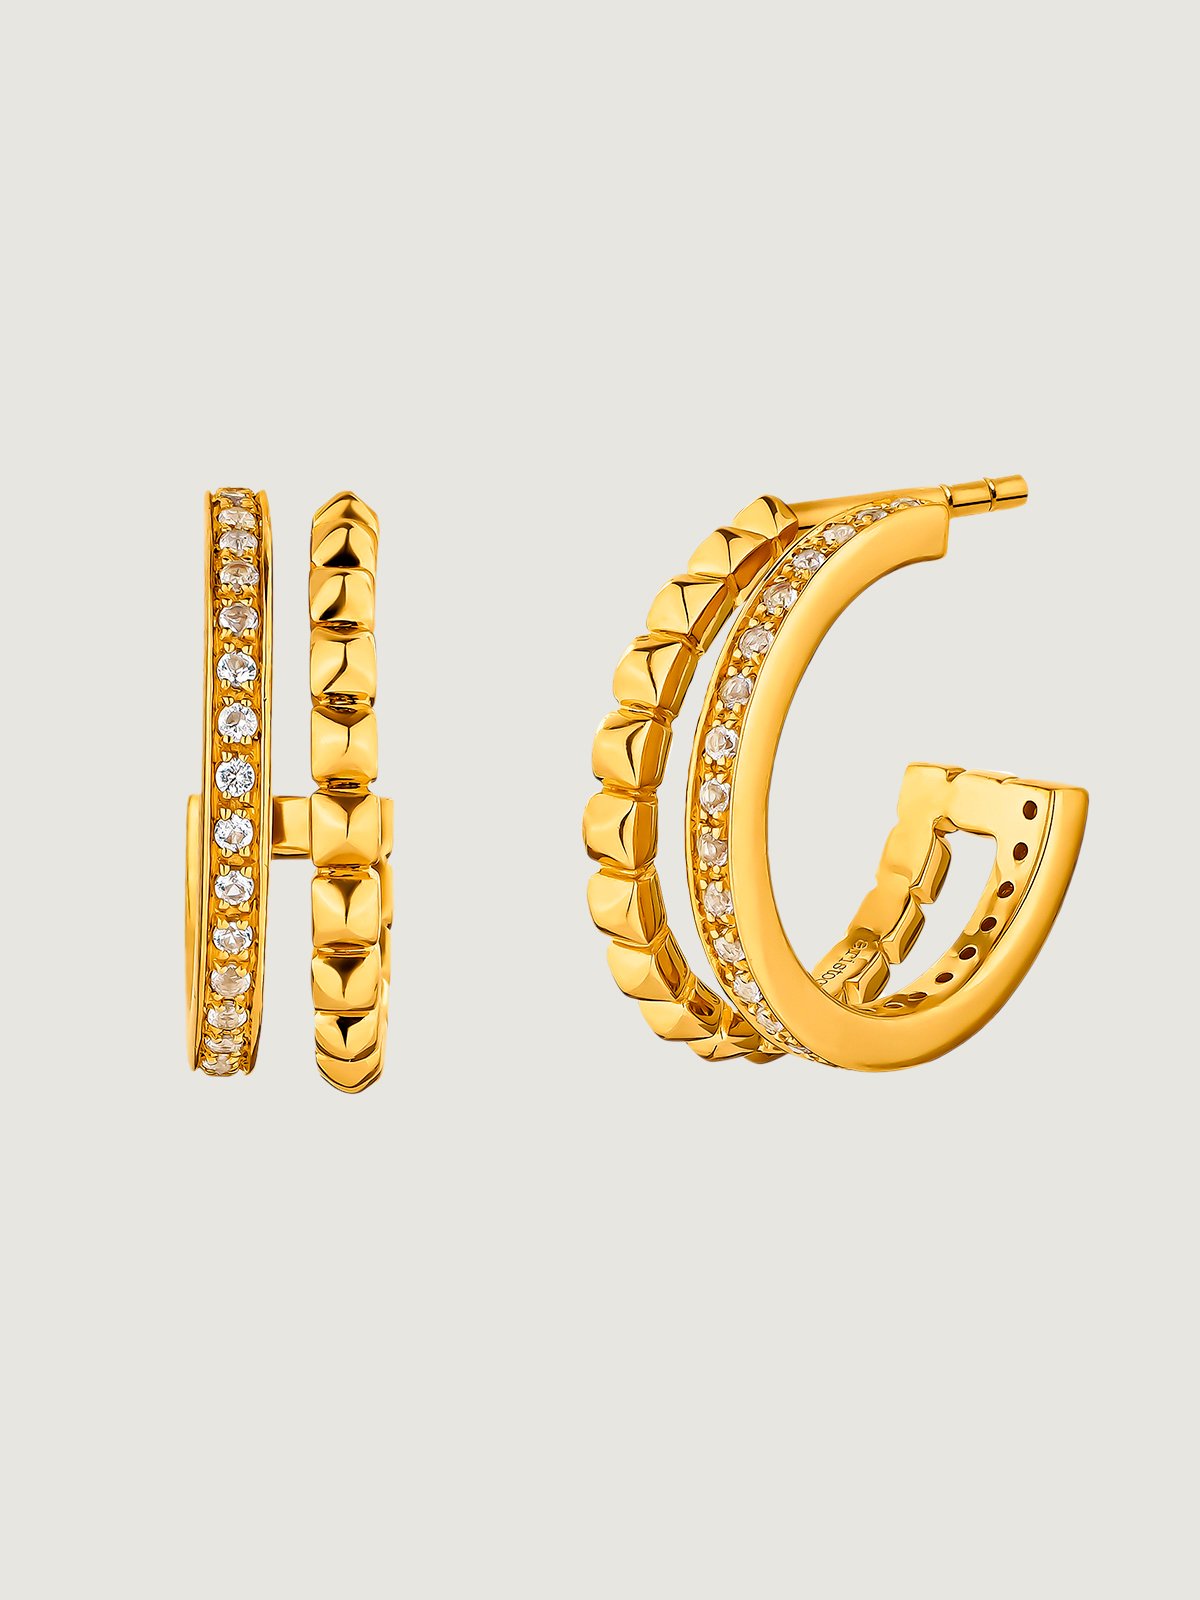 Double hoop earrings made of 925 silver plated in 18K yellow gold with embossing and white topaz.